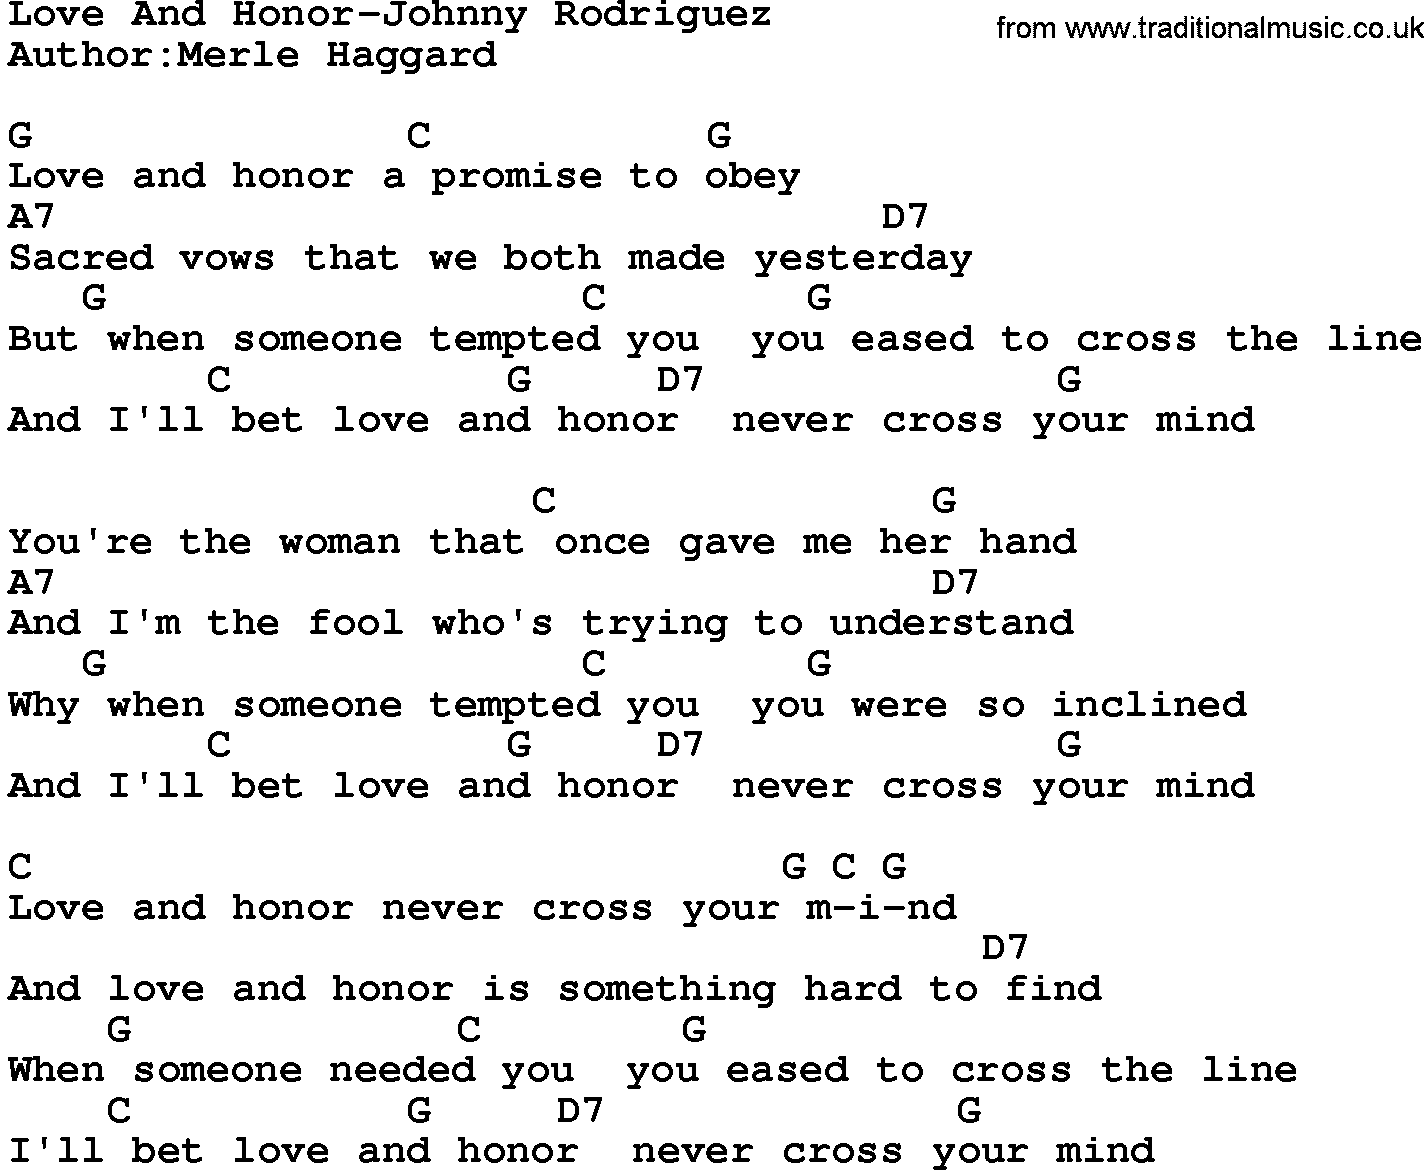 Country music song: Love And Honor-Johnny Rodriguez lyrics and chords